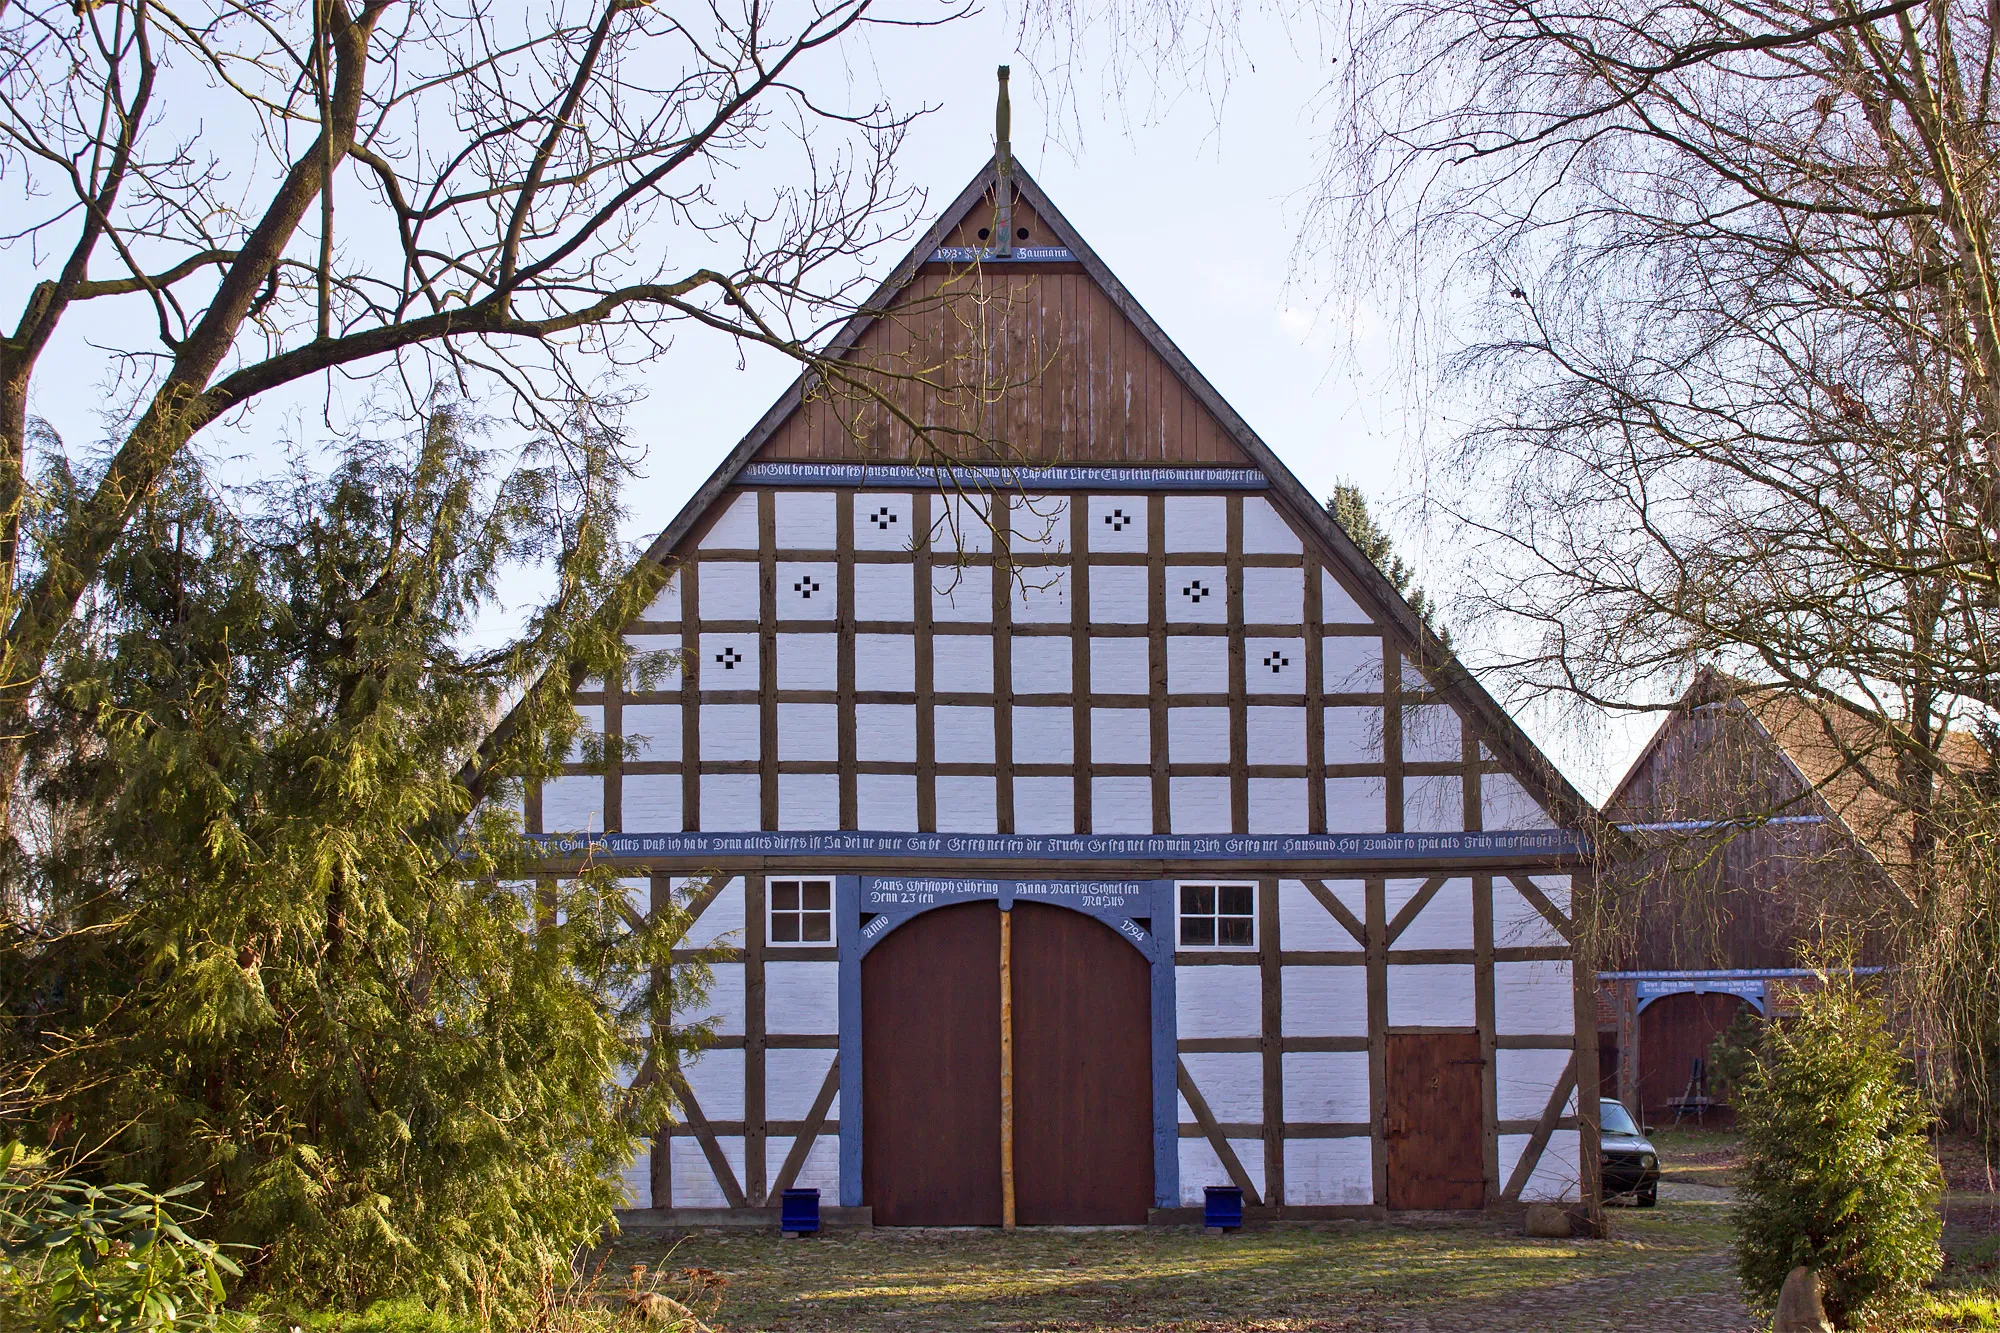 Photo showing: Cultural heritage monument "No 2" in the small village Dalitz near Clenze (district Lüchow-Dannenberg, northern Germany); built in 1794.